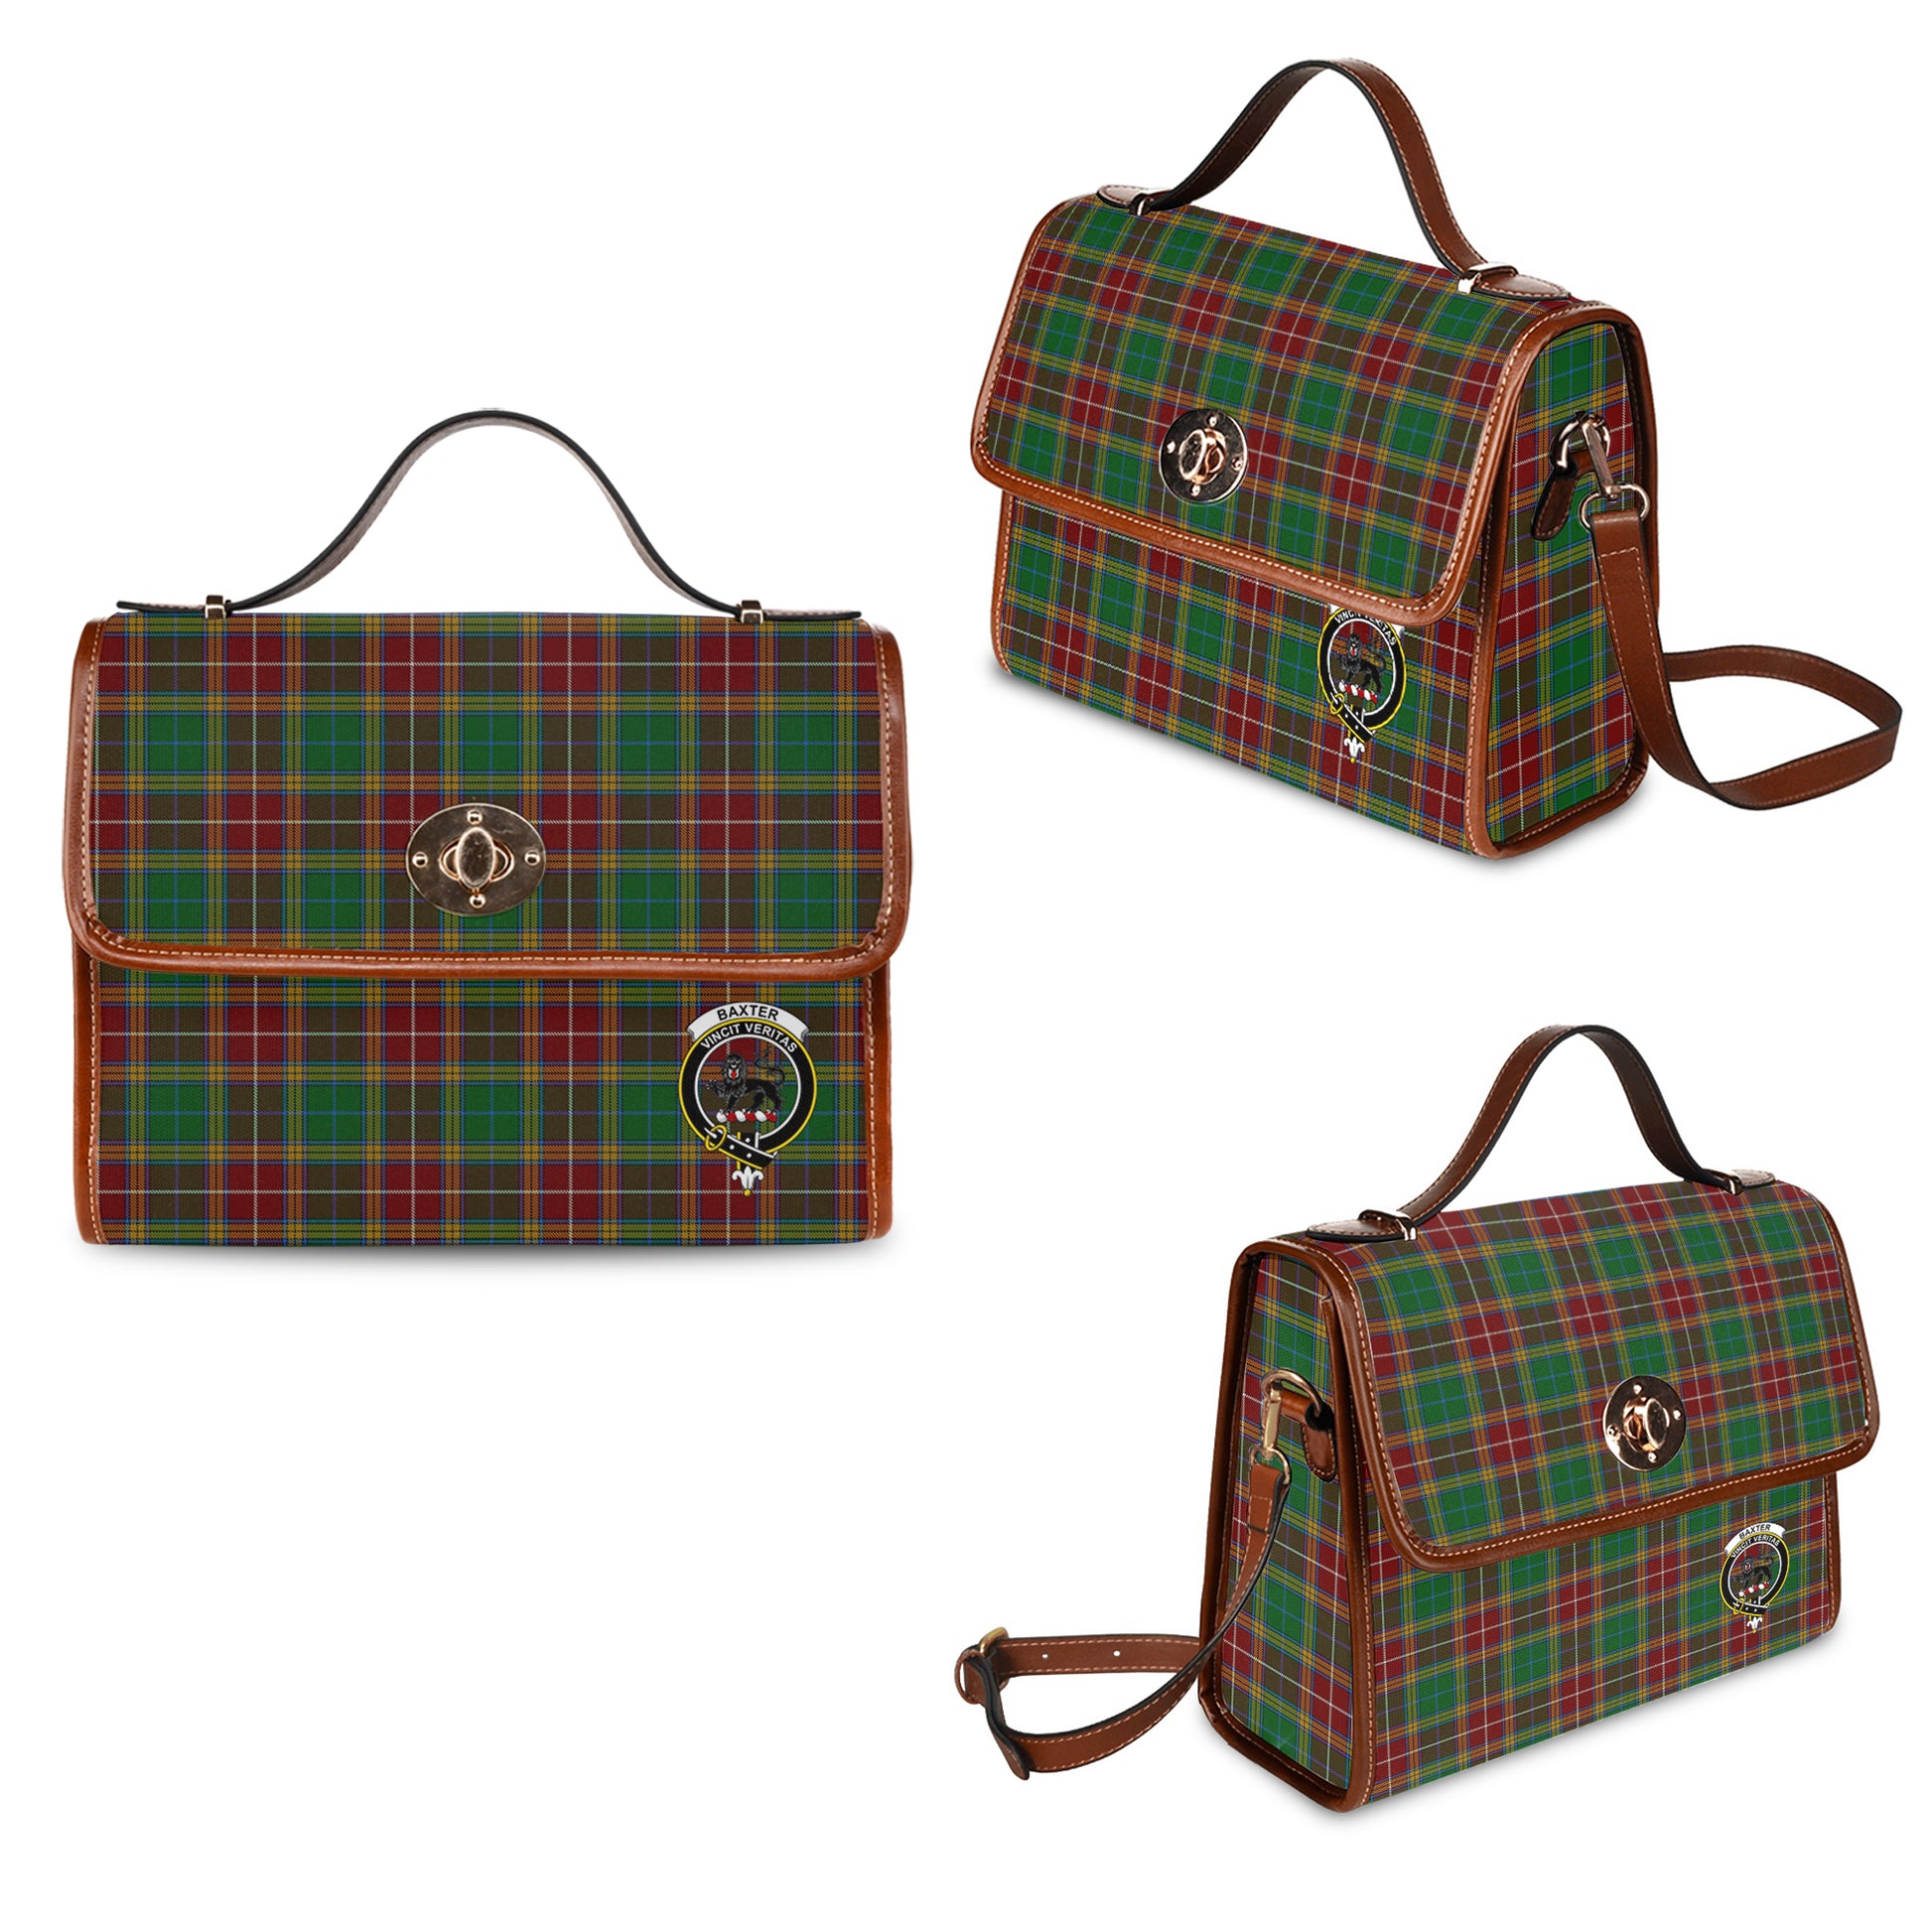 Baxter Tartan Leather Strap Waterproof Canvas Bag with Family Crest One Size 34cm * 42cm (13.4" x 16.5") - Tartanvibesclothing